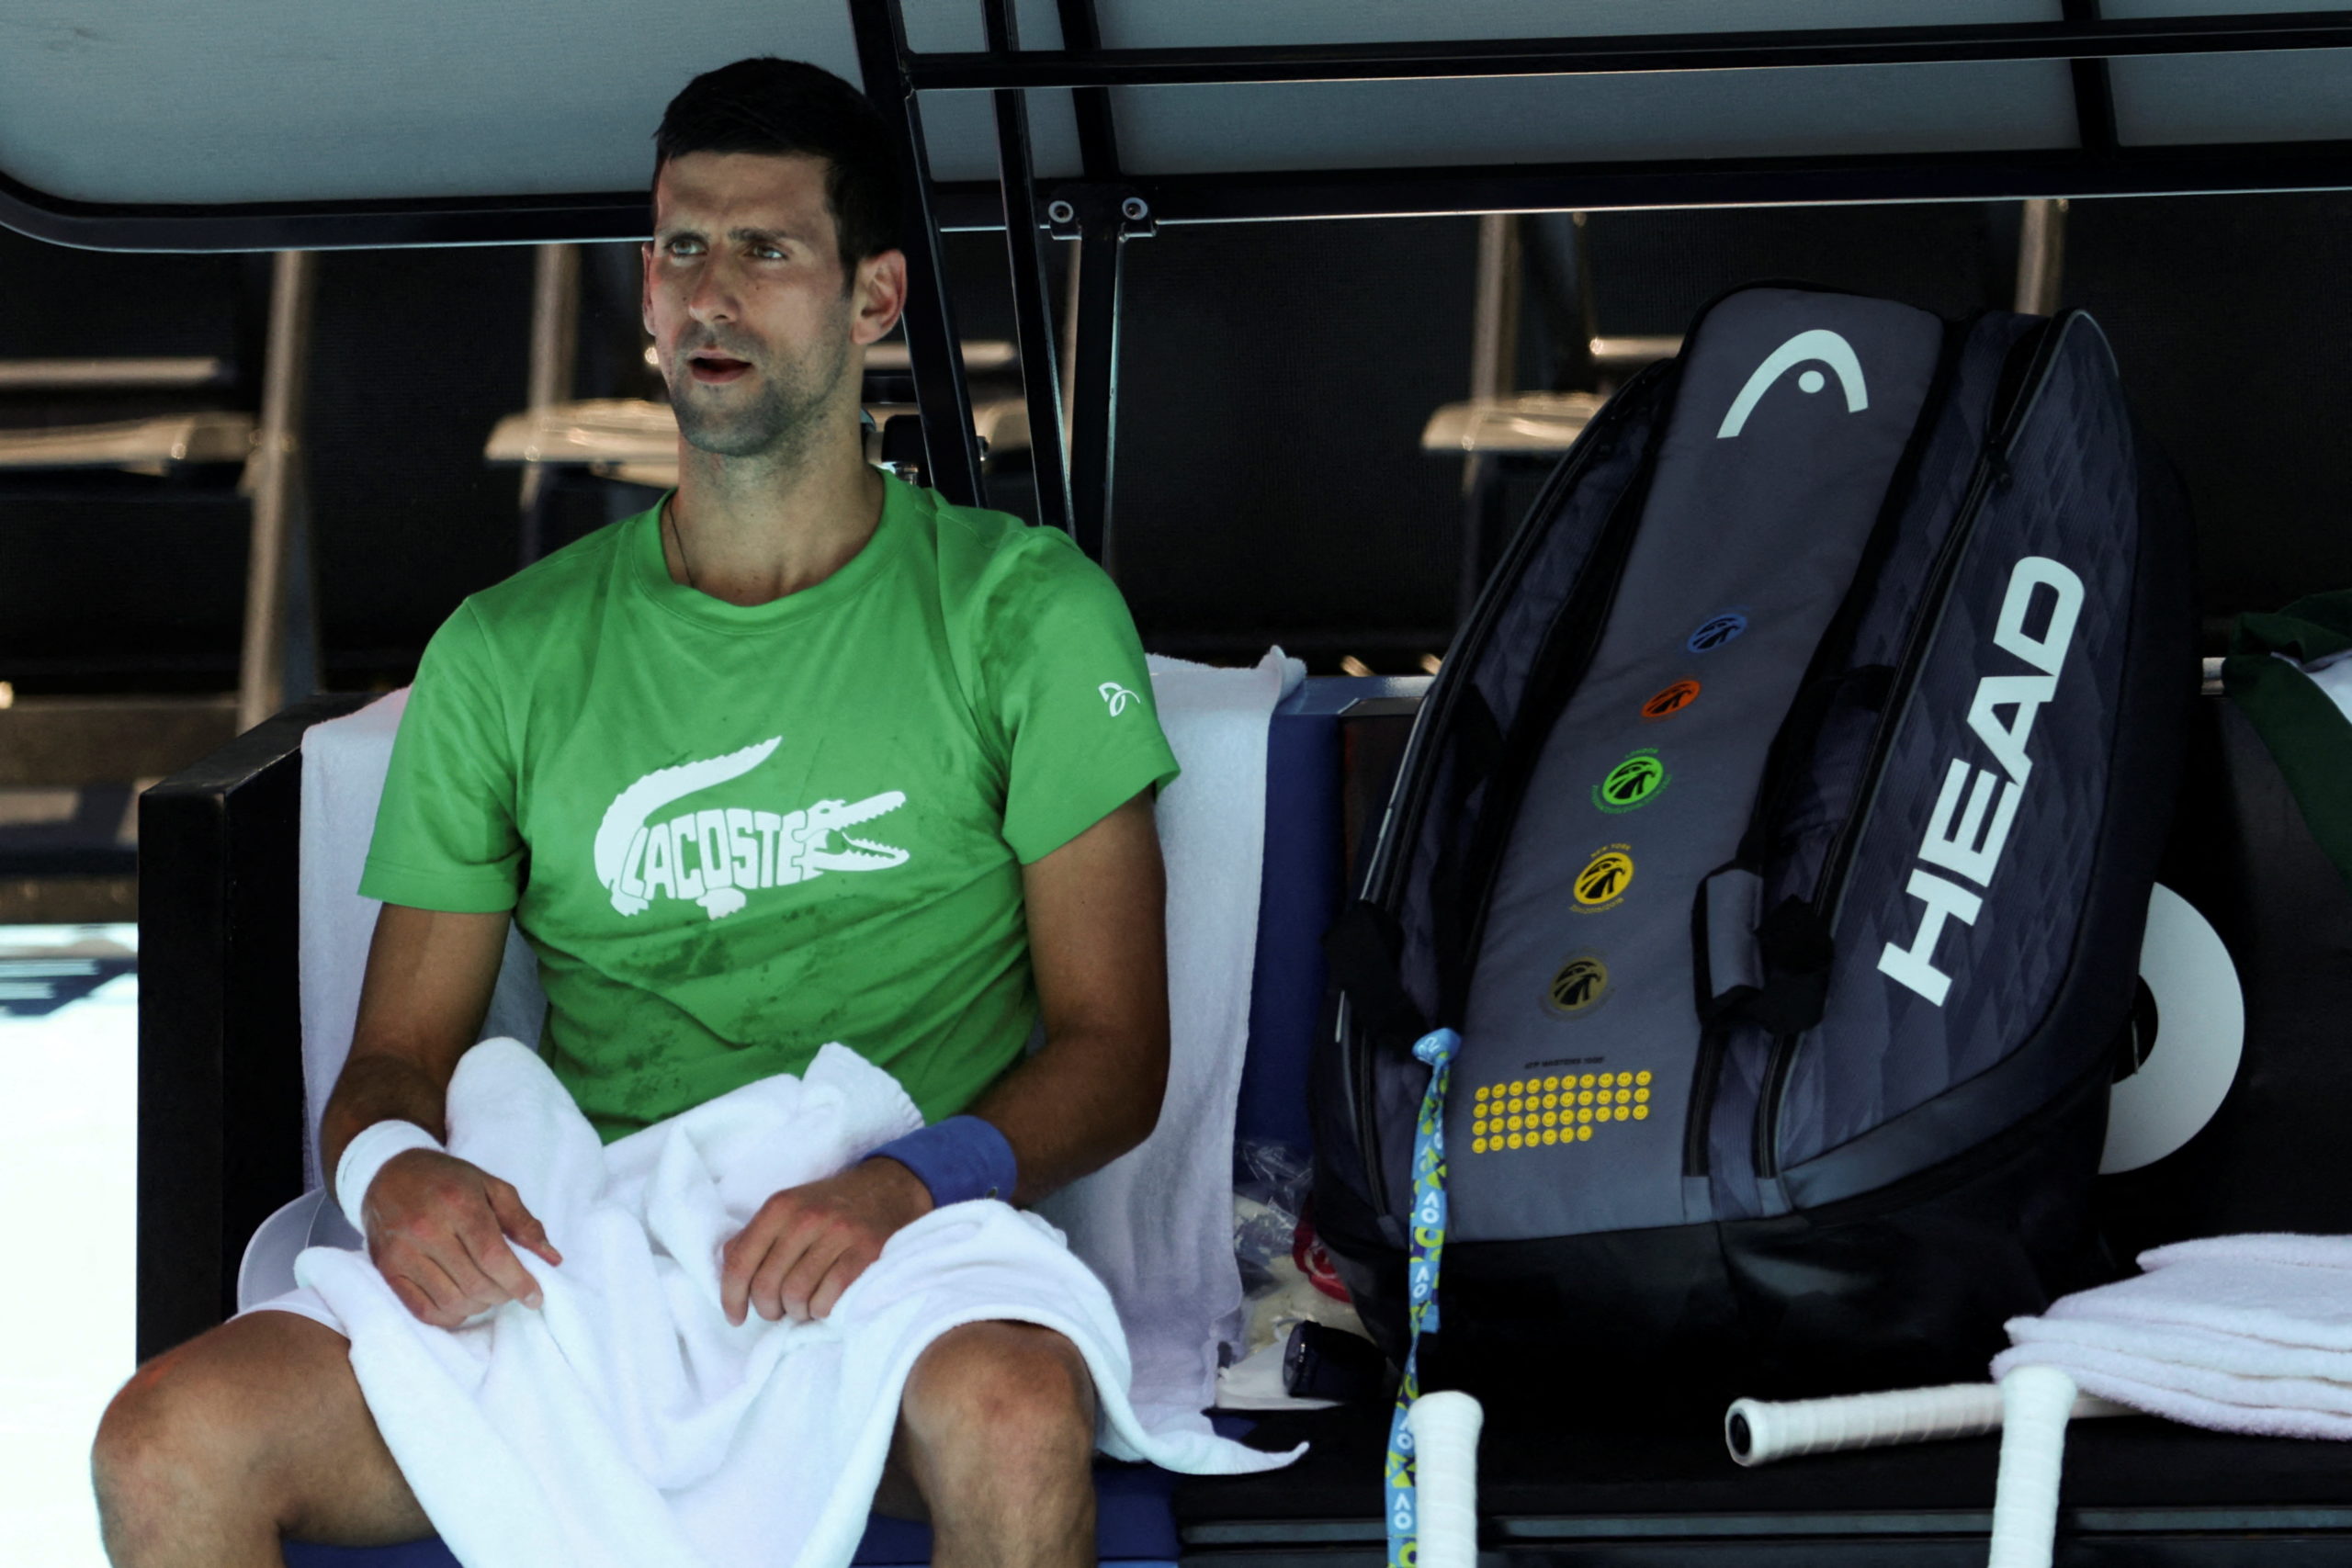 Serbian tennis player Novak Djokovic rests at Melbourne Park as questions remain over the legal battle regarding his visa to play in the Australian Open in Melbourne, Australia, January 13, 2022. 